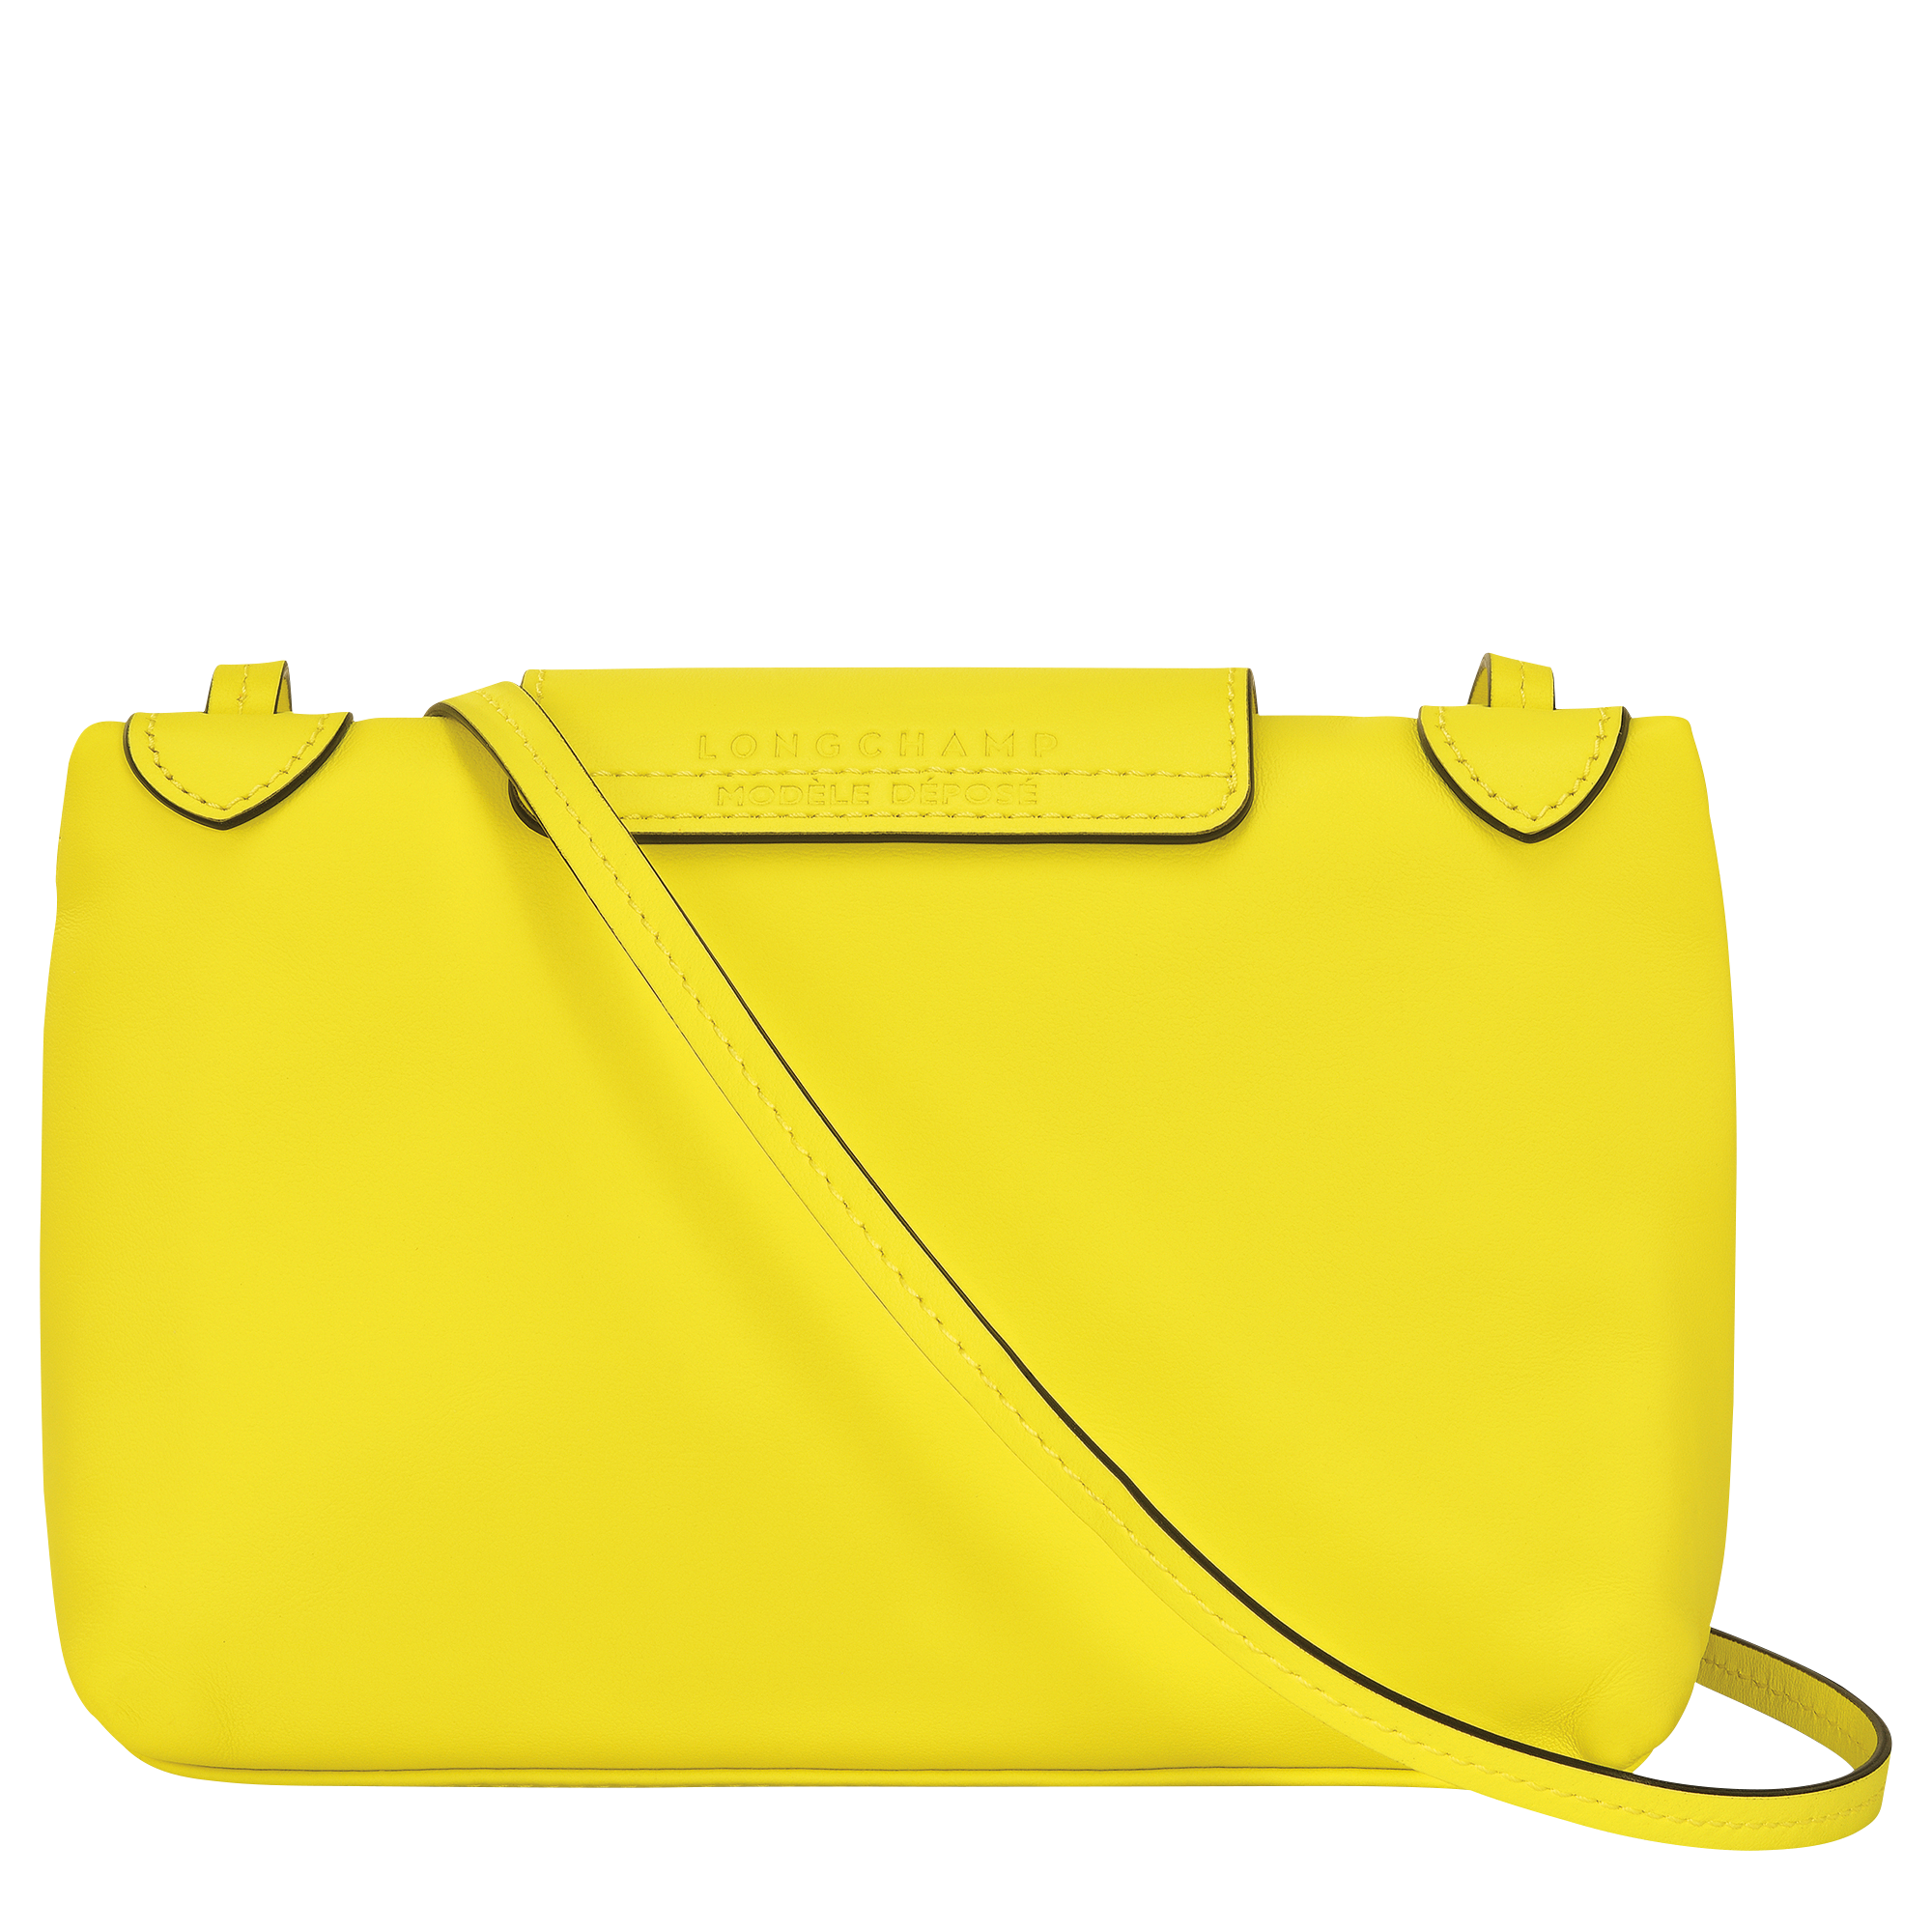 Longchamp BLE PLIAGE XTRA Pouch - Yellow Leather (Lemon) NEW with